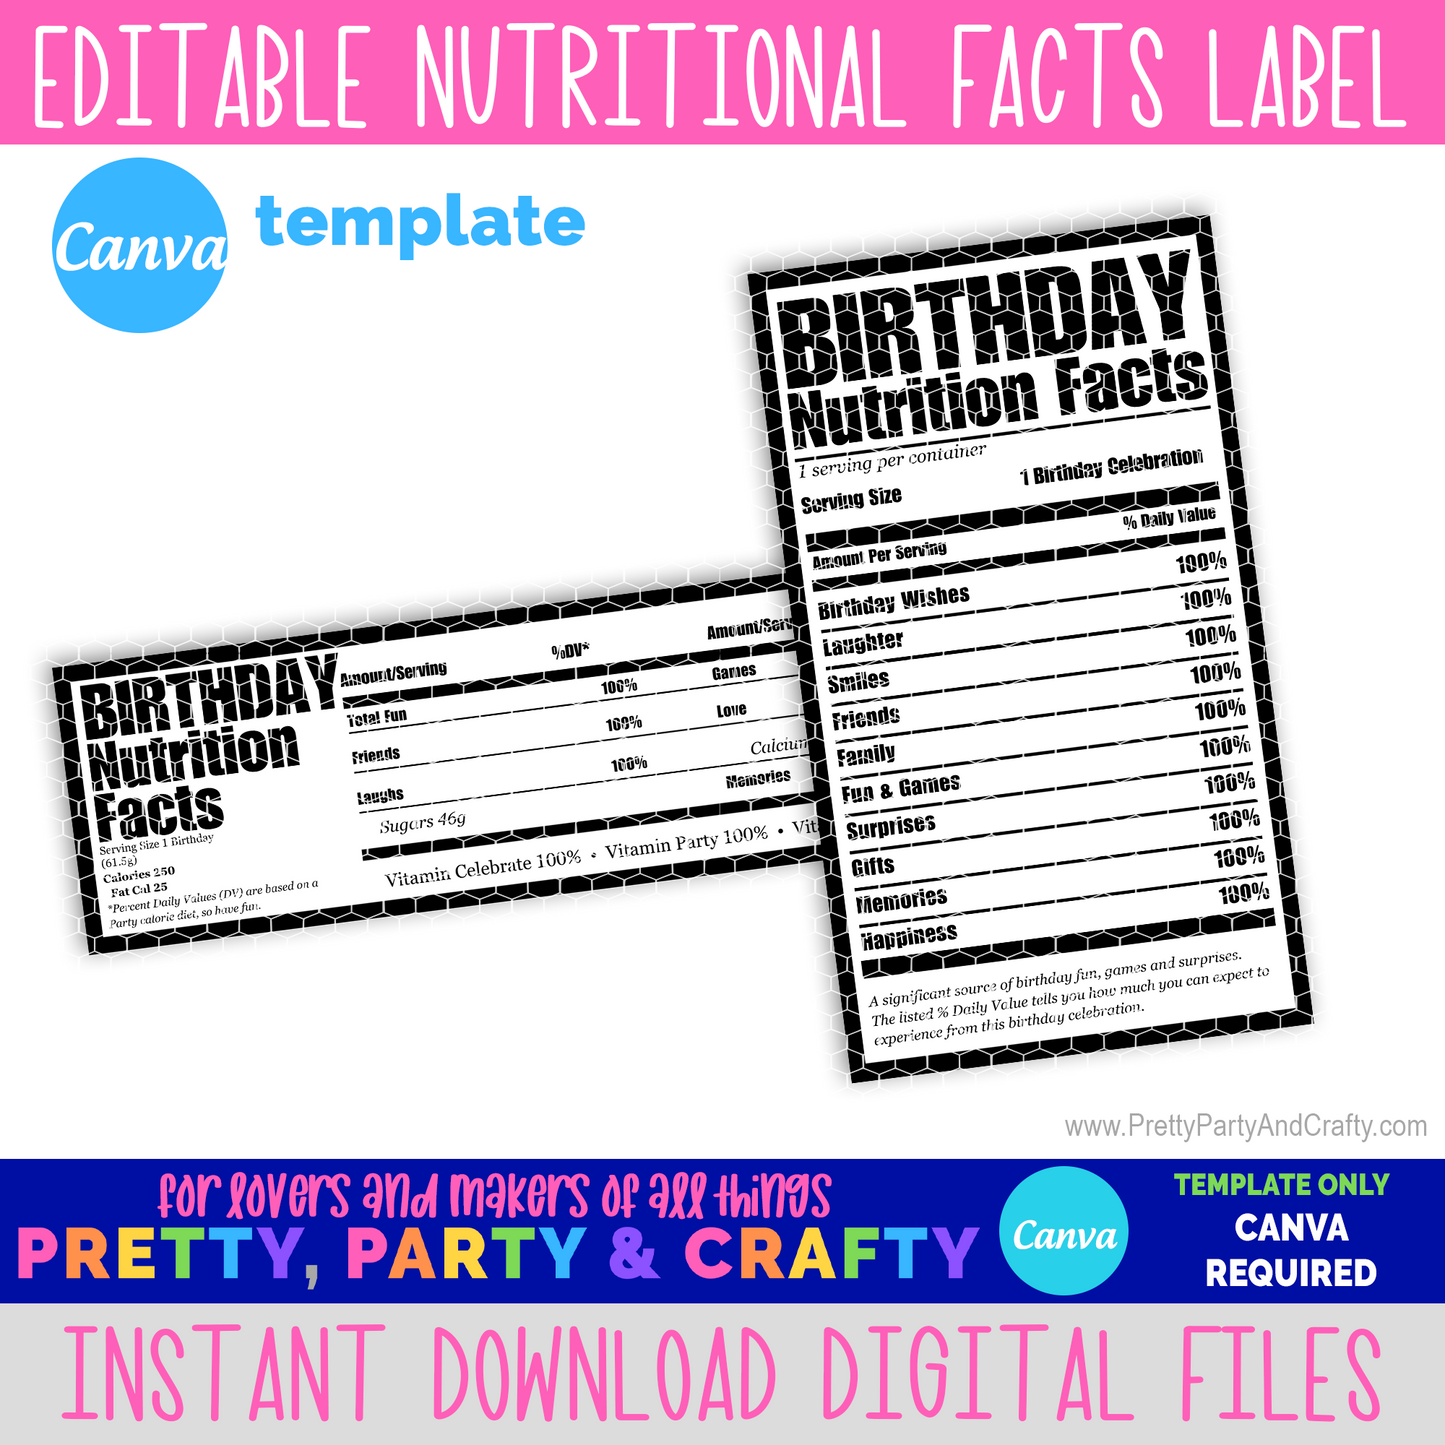 Nutrition Facts Label Template-CANVA